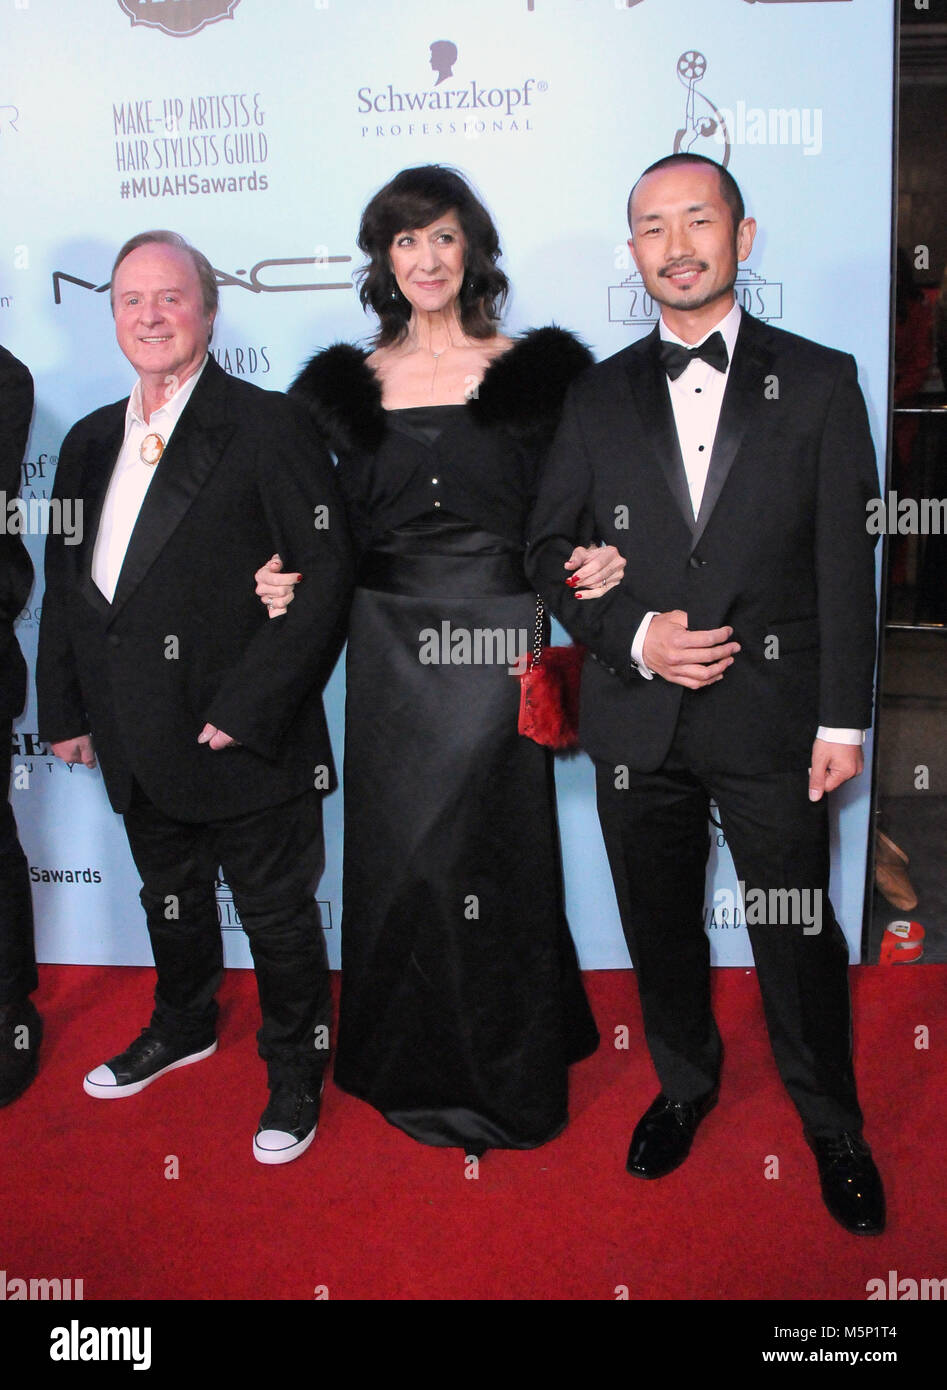 Los Angeles, California, USA. 24th February, 2018. (L-R) Hair stylists Tom Opitz and Audrey Futterman-Stern and Makeup artist Koji Ohmura attend the 2018 Make-up and Hair Stylists Guild Awards at The Novo on February 24, 2018 in Los Angeles, California. Photo by Barry King/Alamy Live News Stock Photo